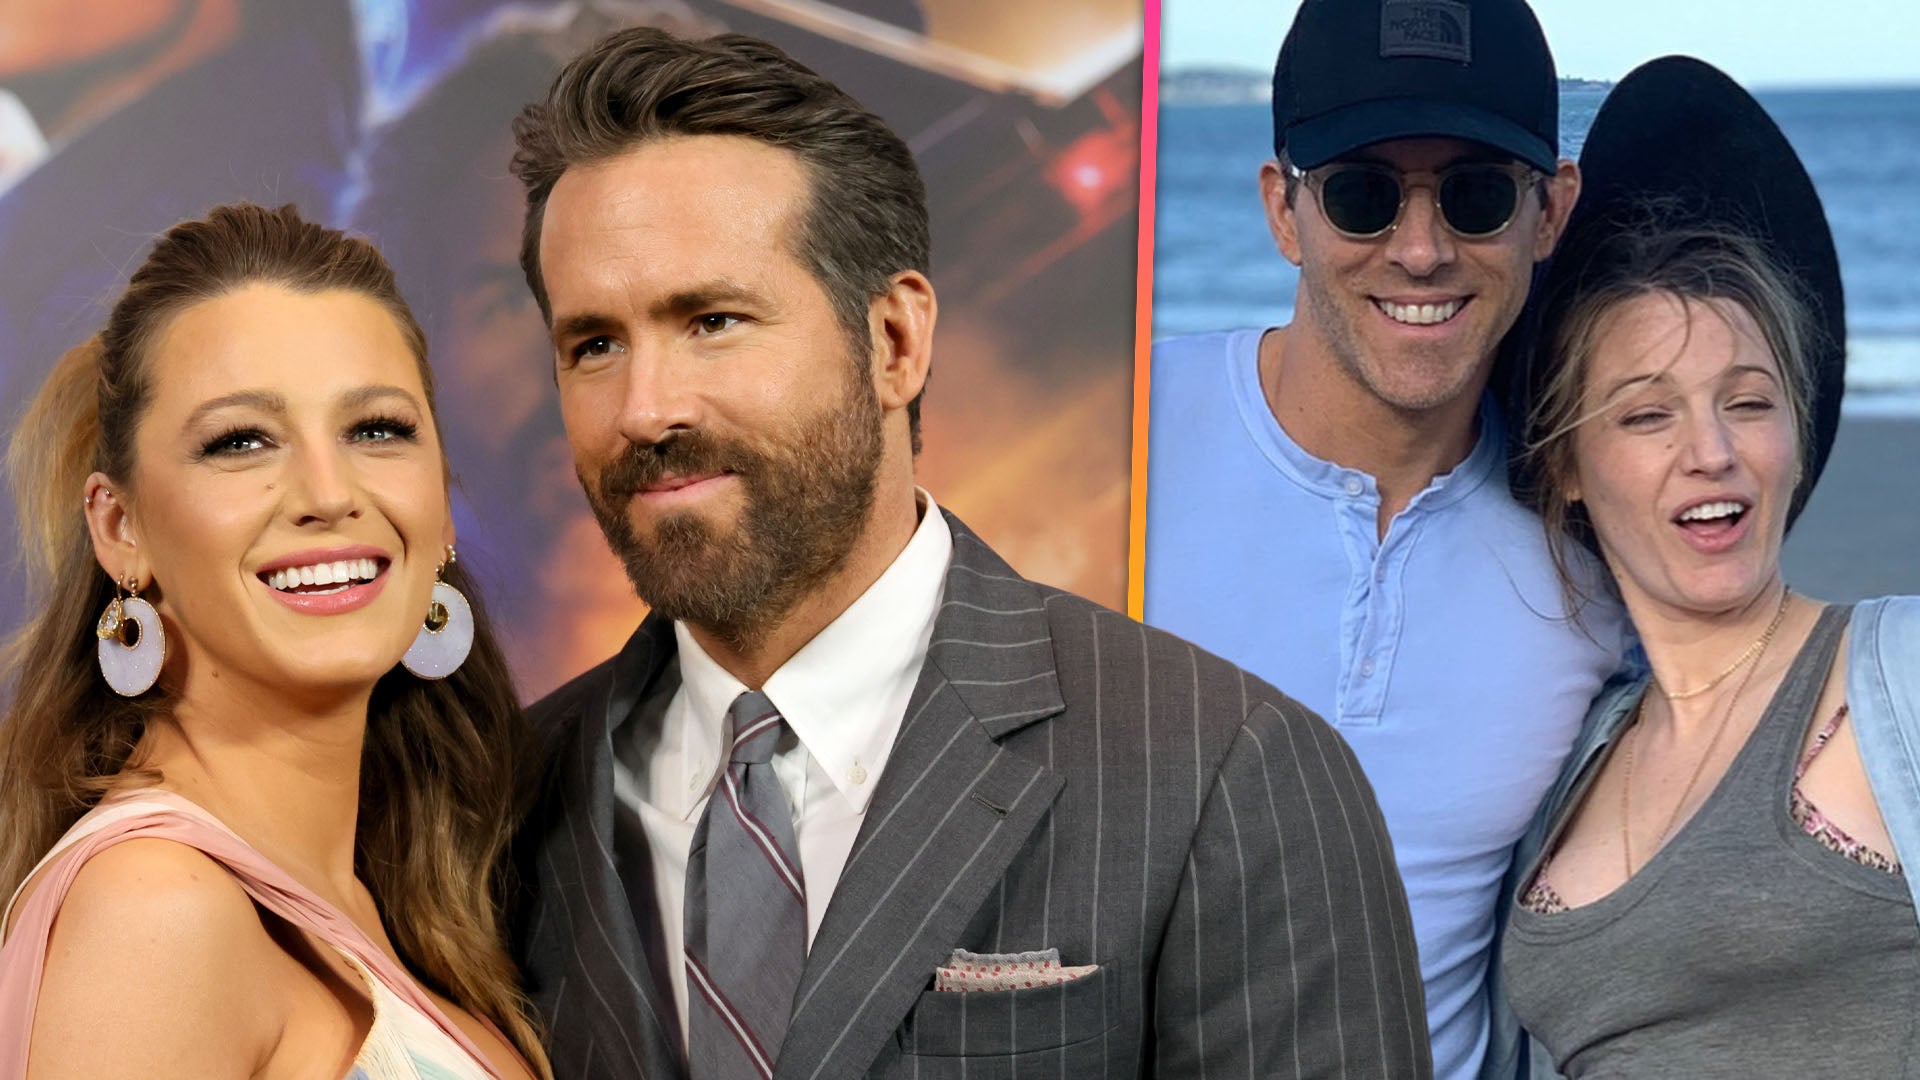 Times Ryan Reynolds & Blake Lively Made the Internet Cackle